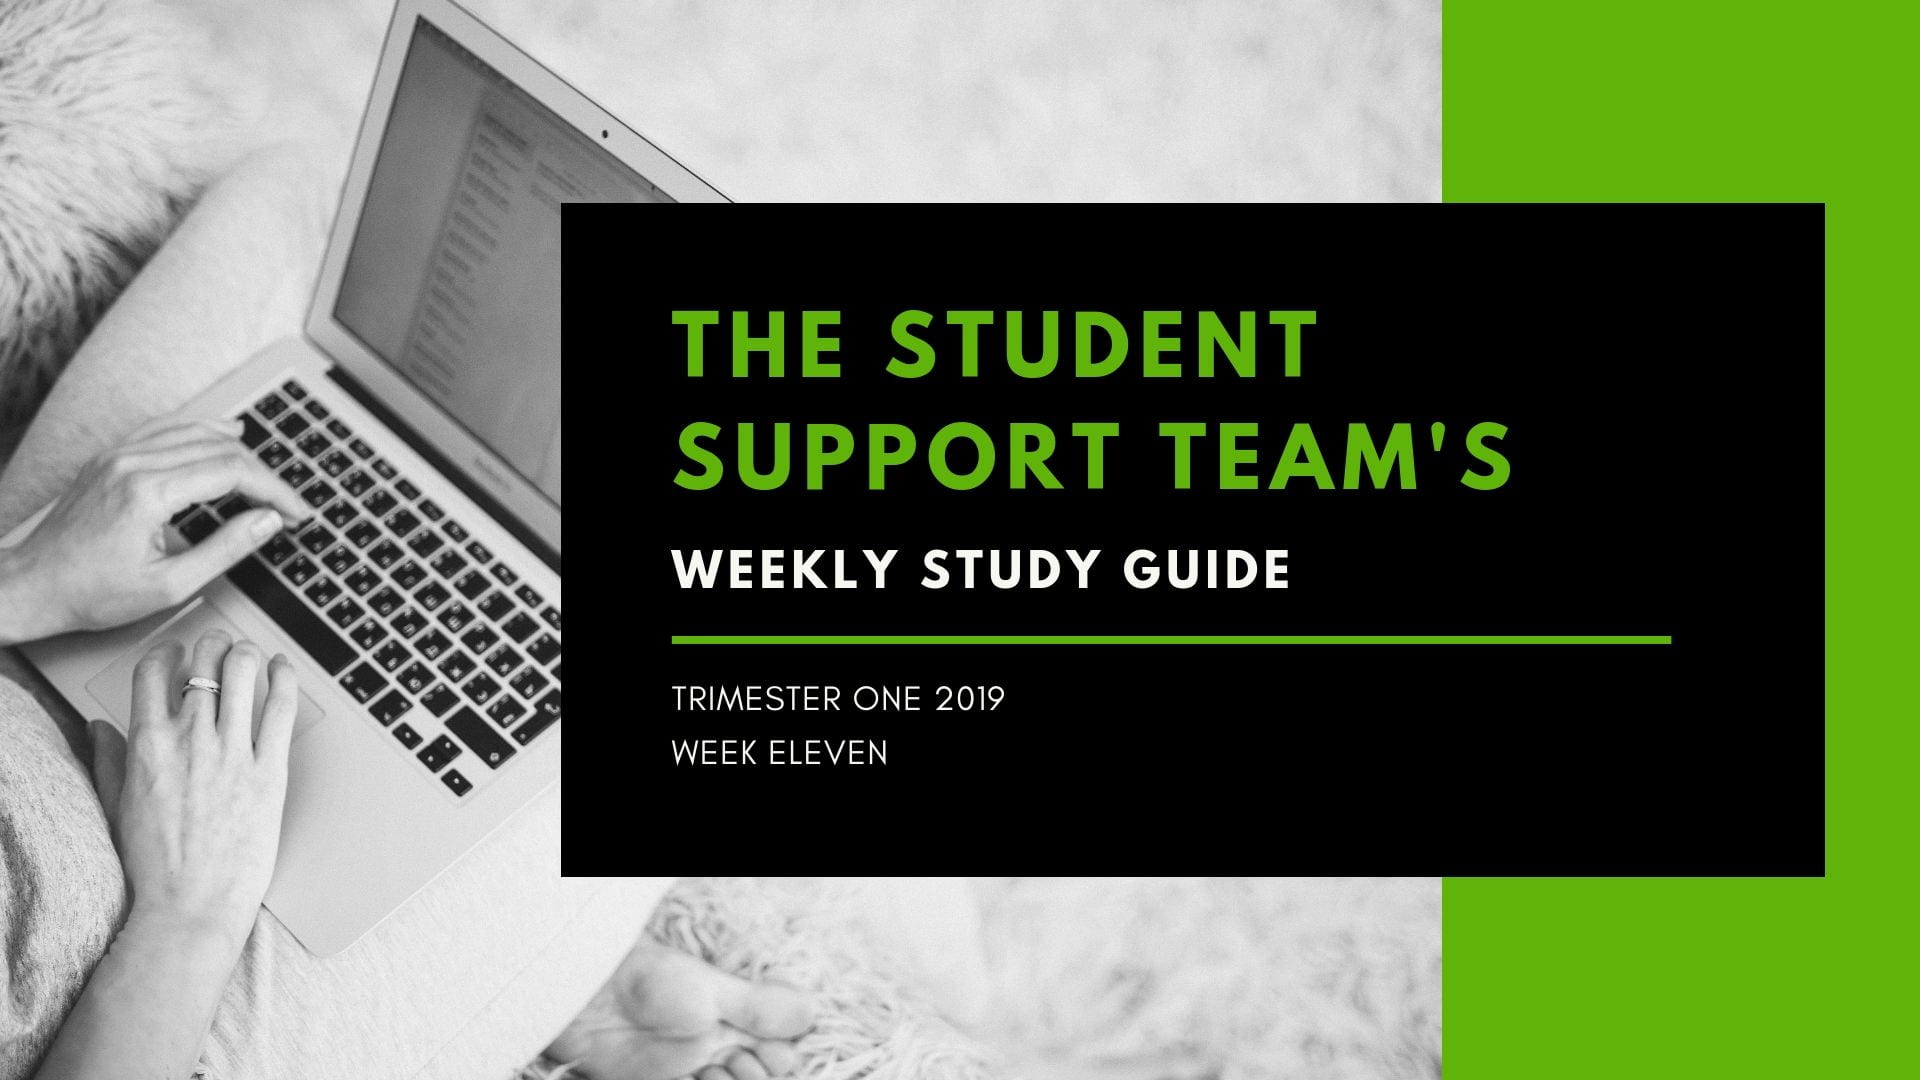 The Student Support Team’s Weekly Study Guide: Week Eleven; Get Study Tips and Tricks